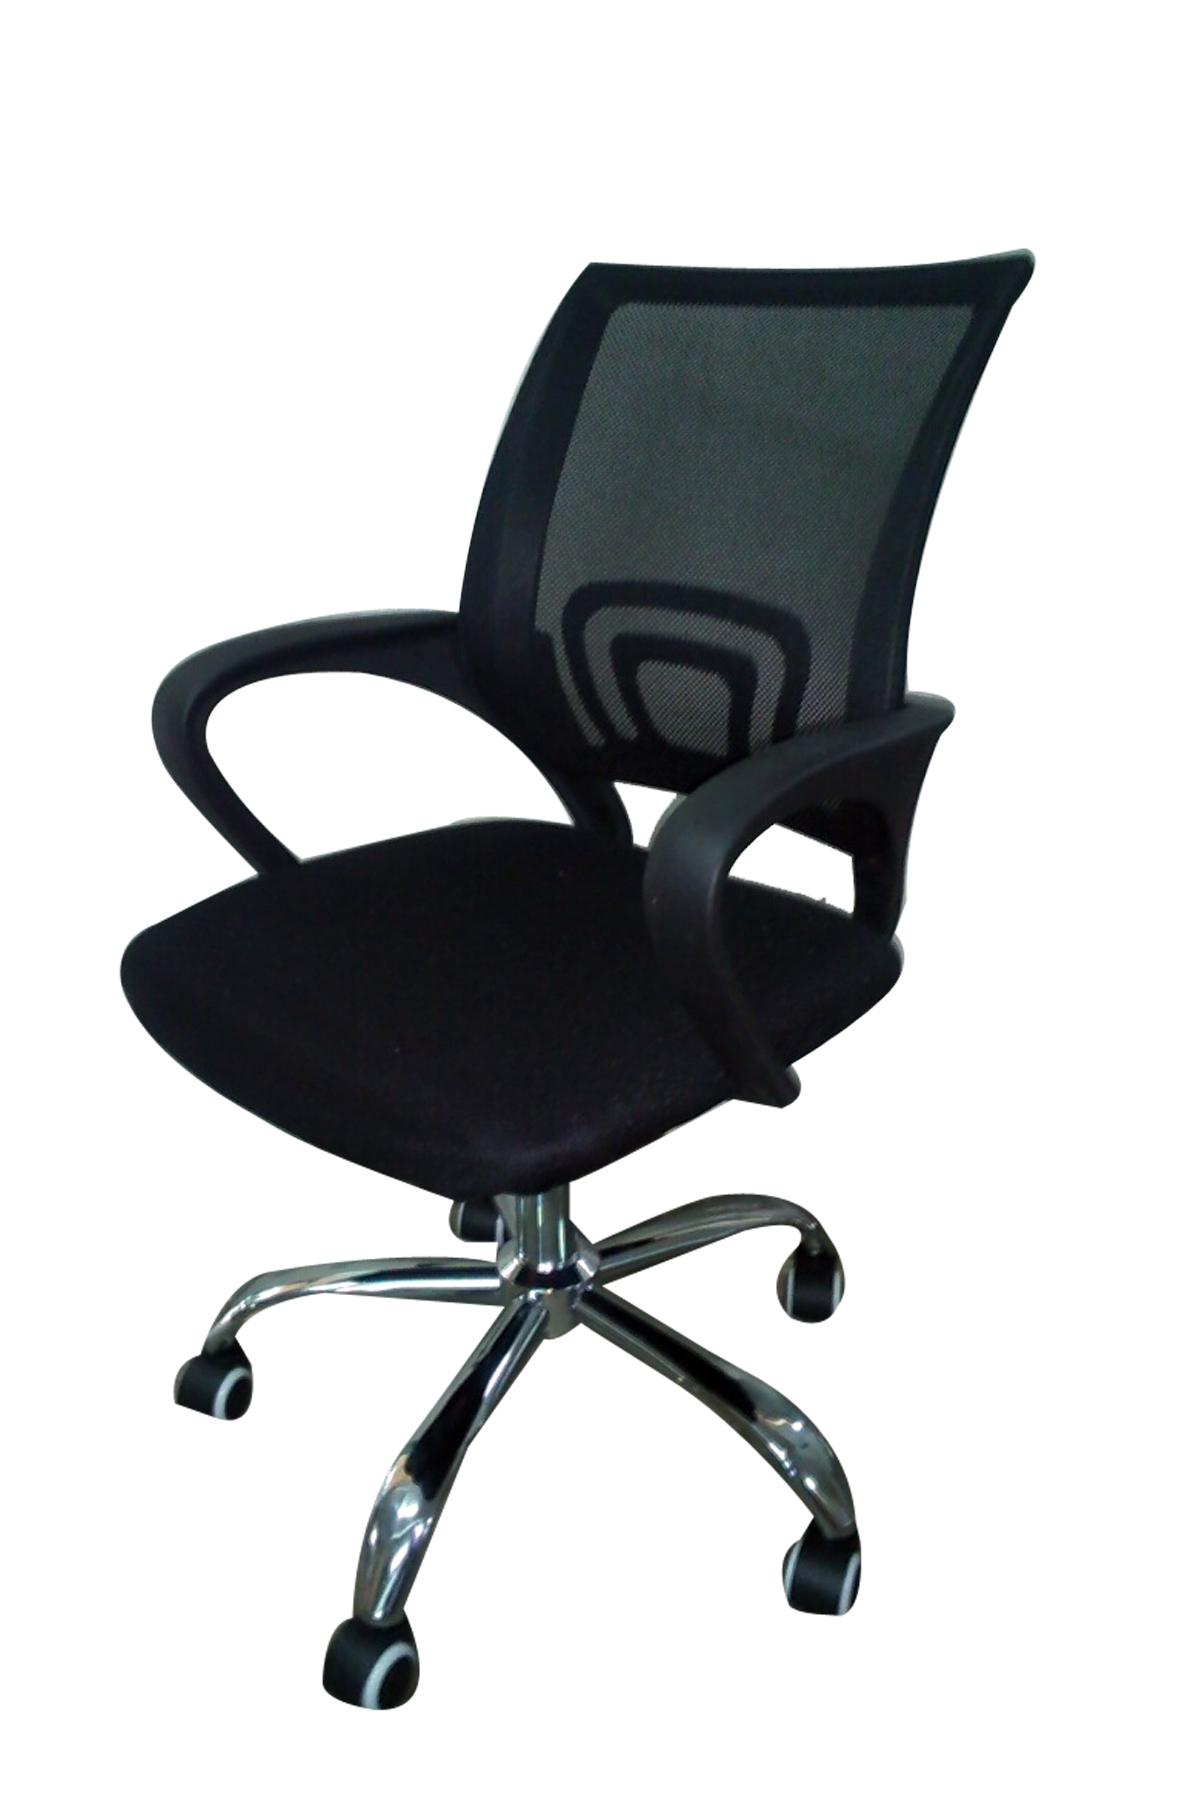 Buy Young Power New World Nuxe Wanted Home Office Chairs At Best